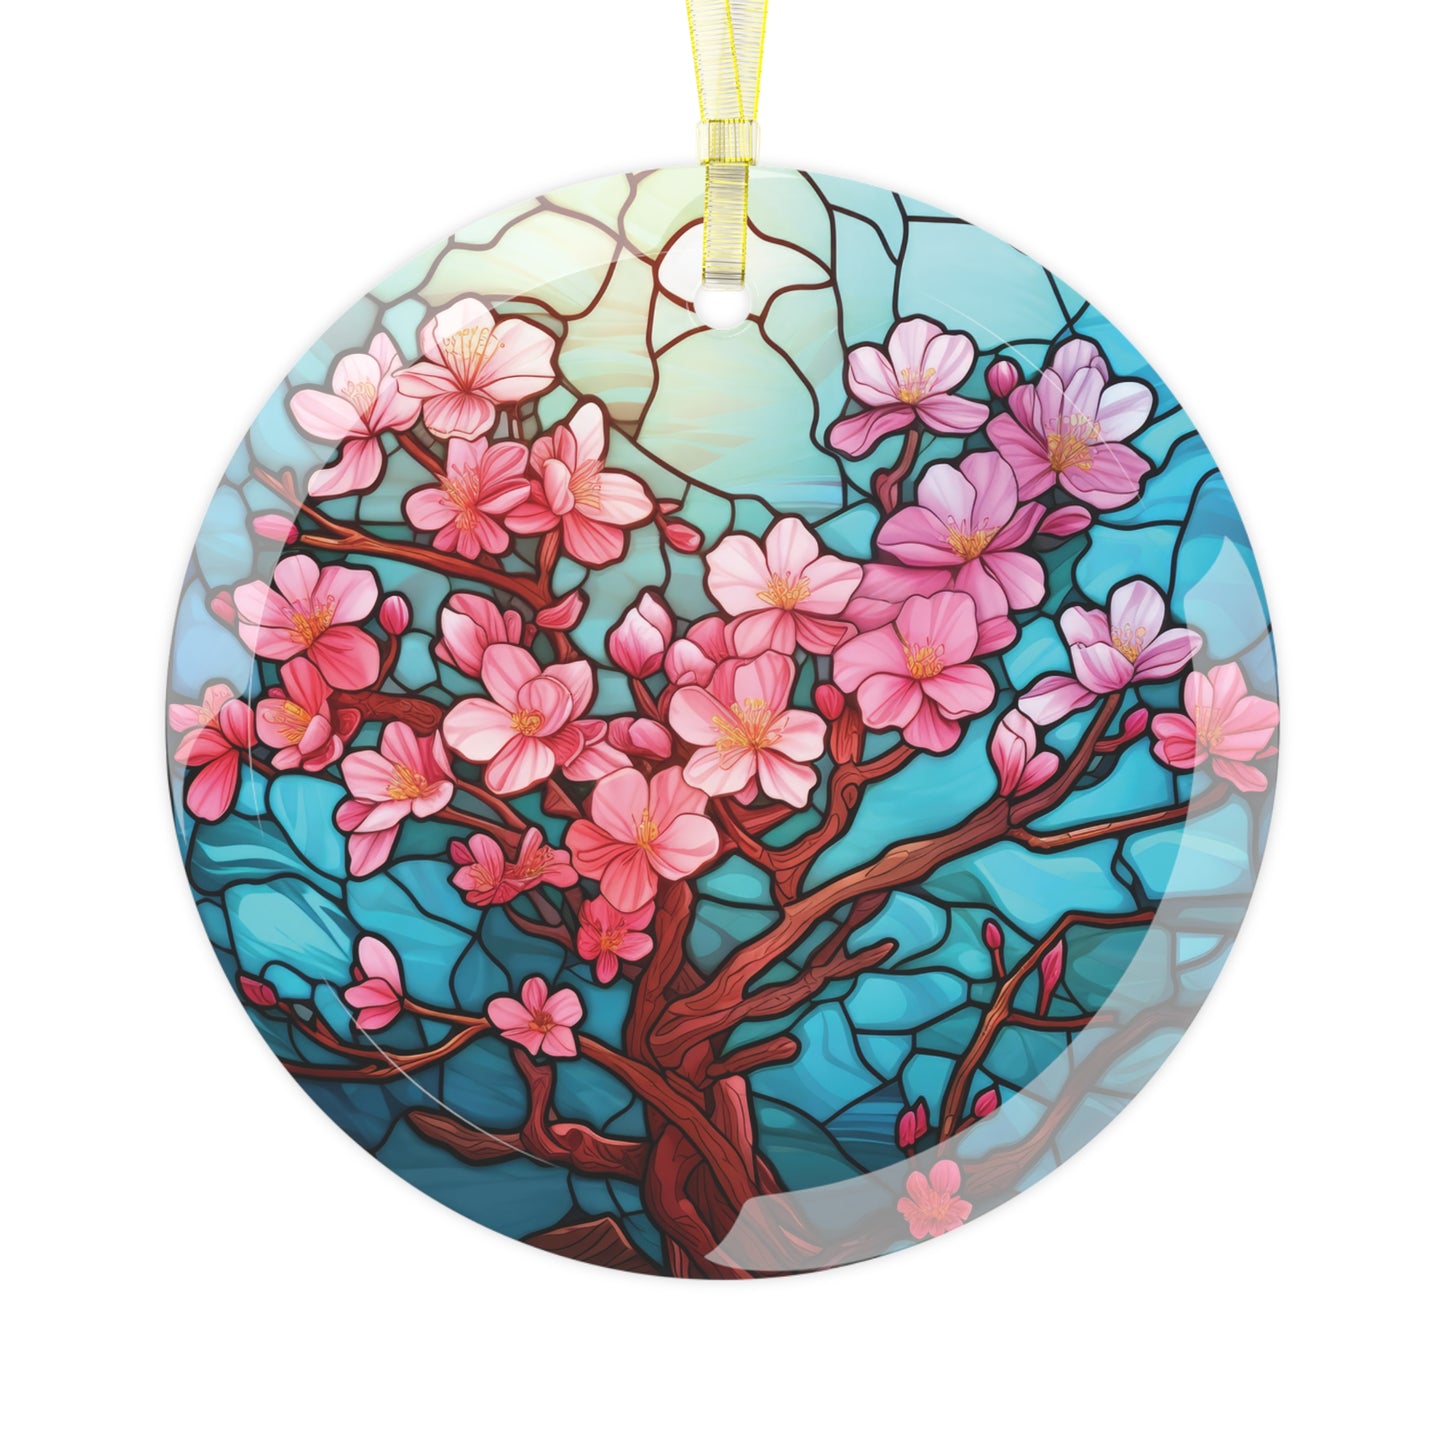 Japanese Sakura Blooming Cherry Blossom Tree, Stained Glass Inspired Colorful Glass Ornament